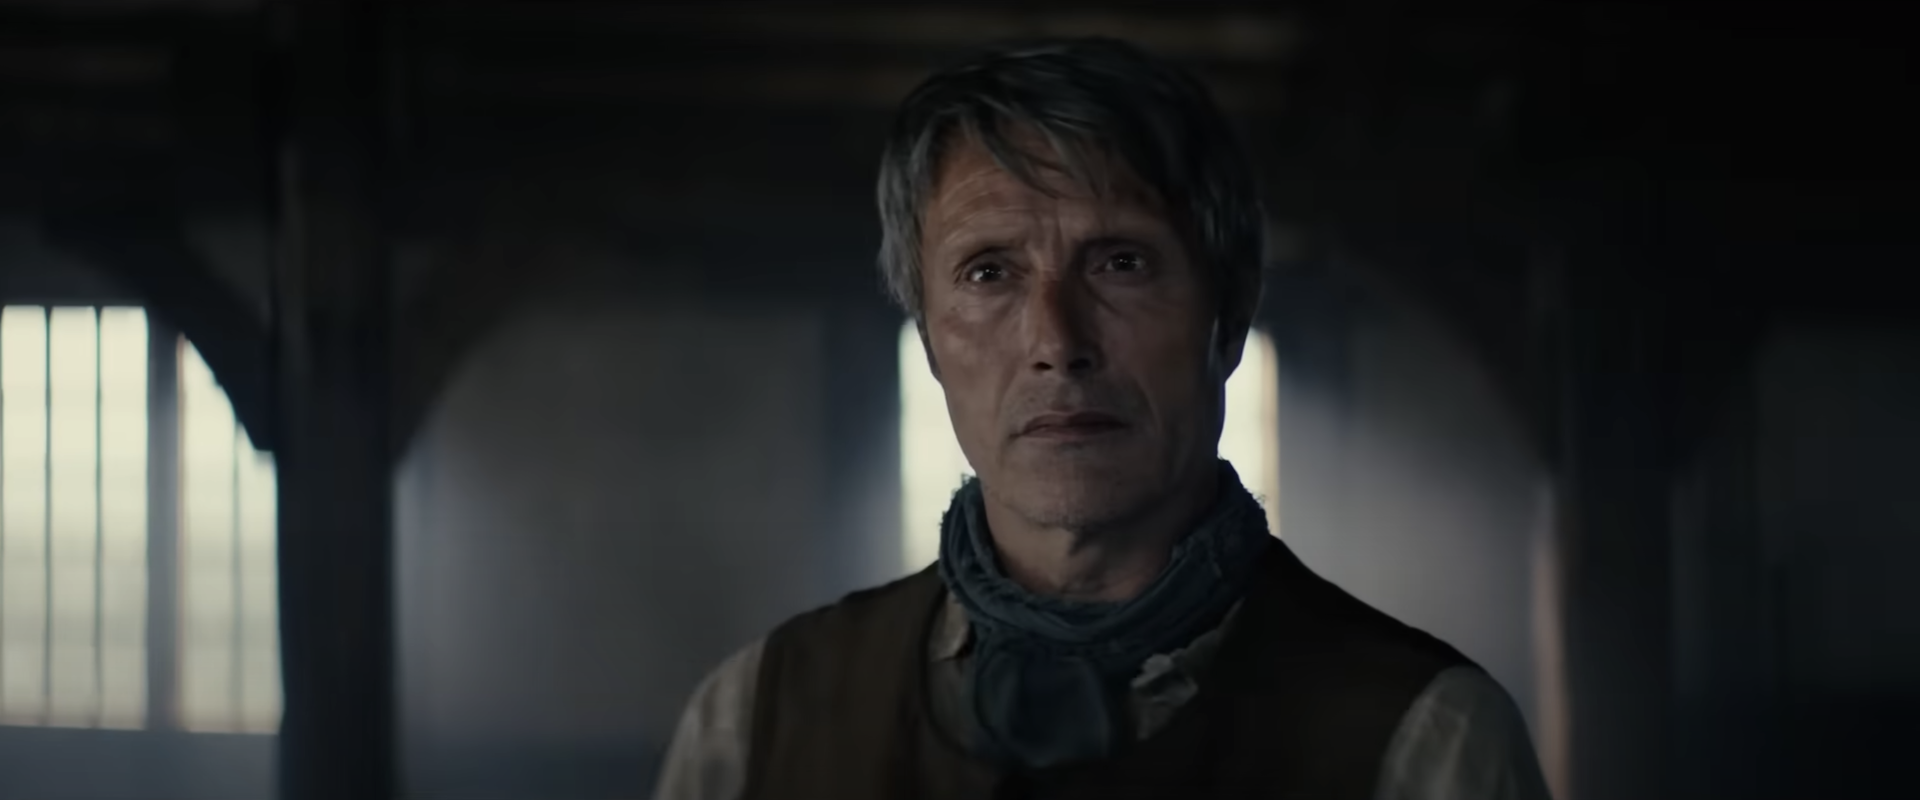 The Promised Land' Review: Mads Mikkelsen Anchors a Rip-Roaring Epic